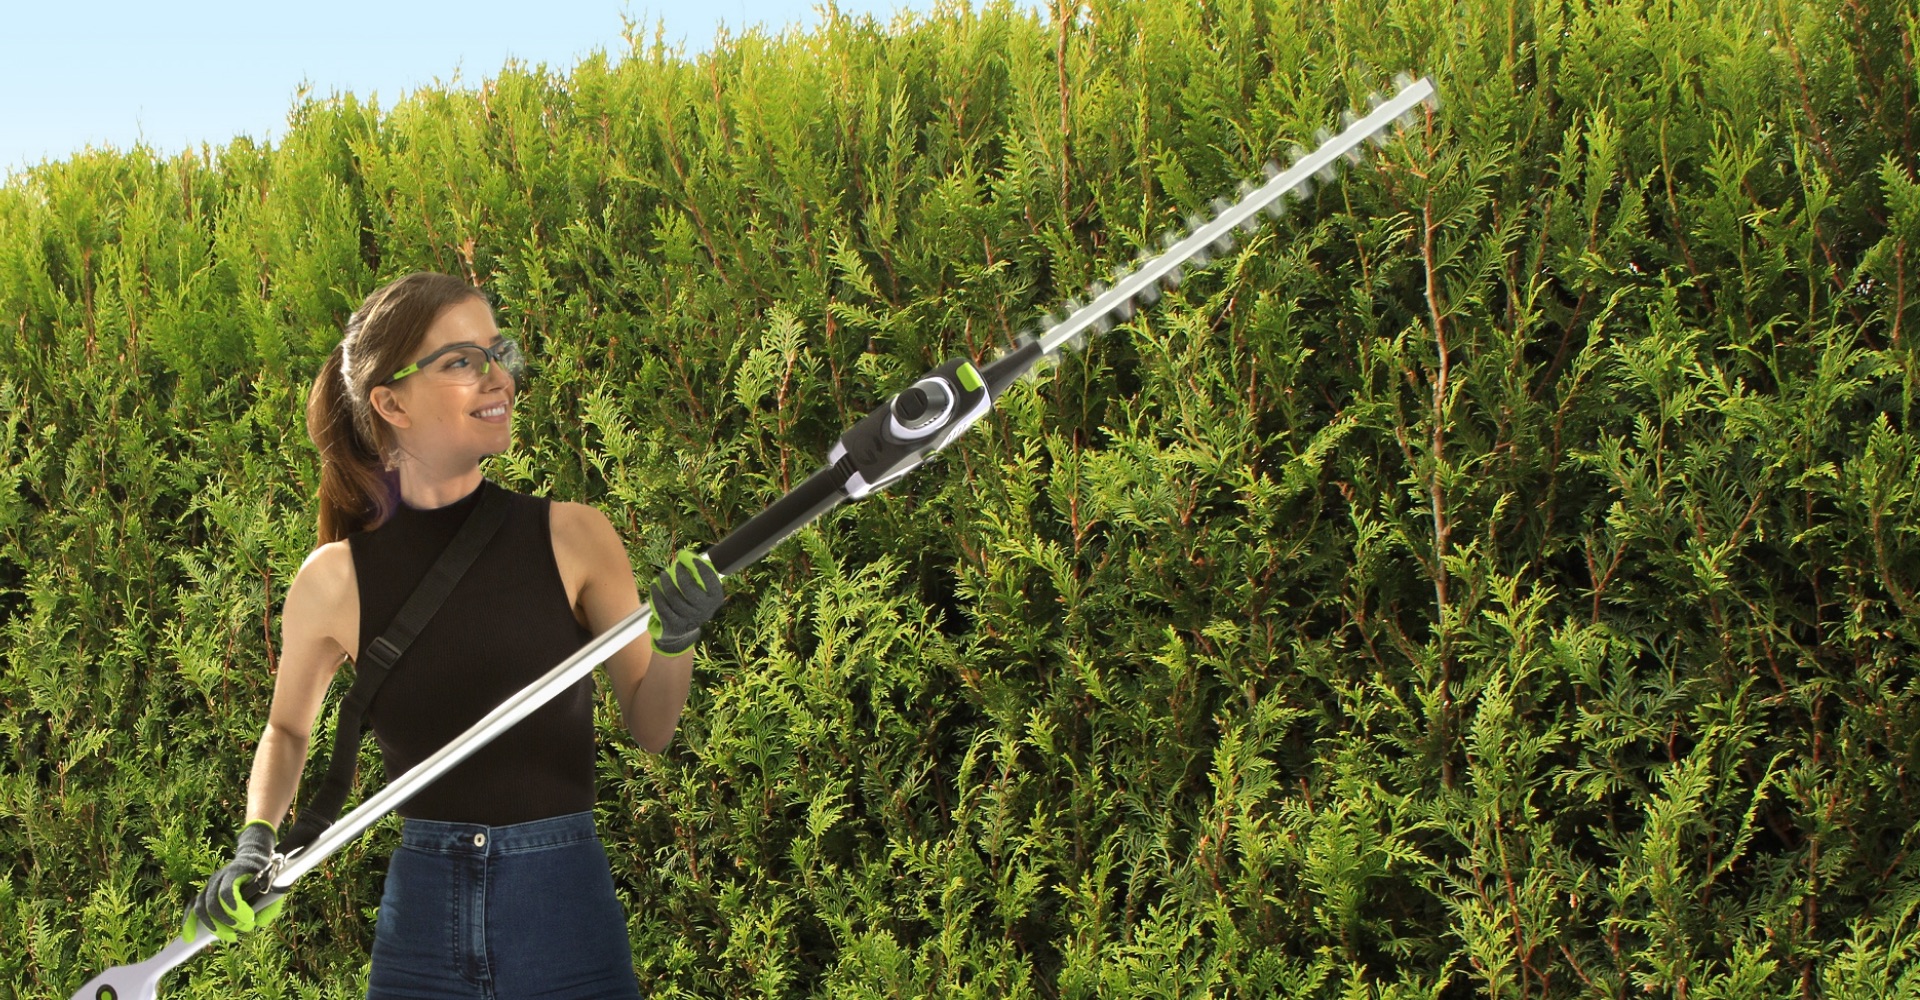 HT50 telescopic hedge trimmer